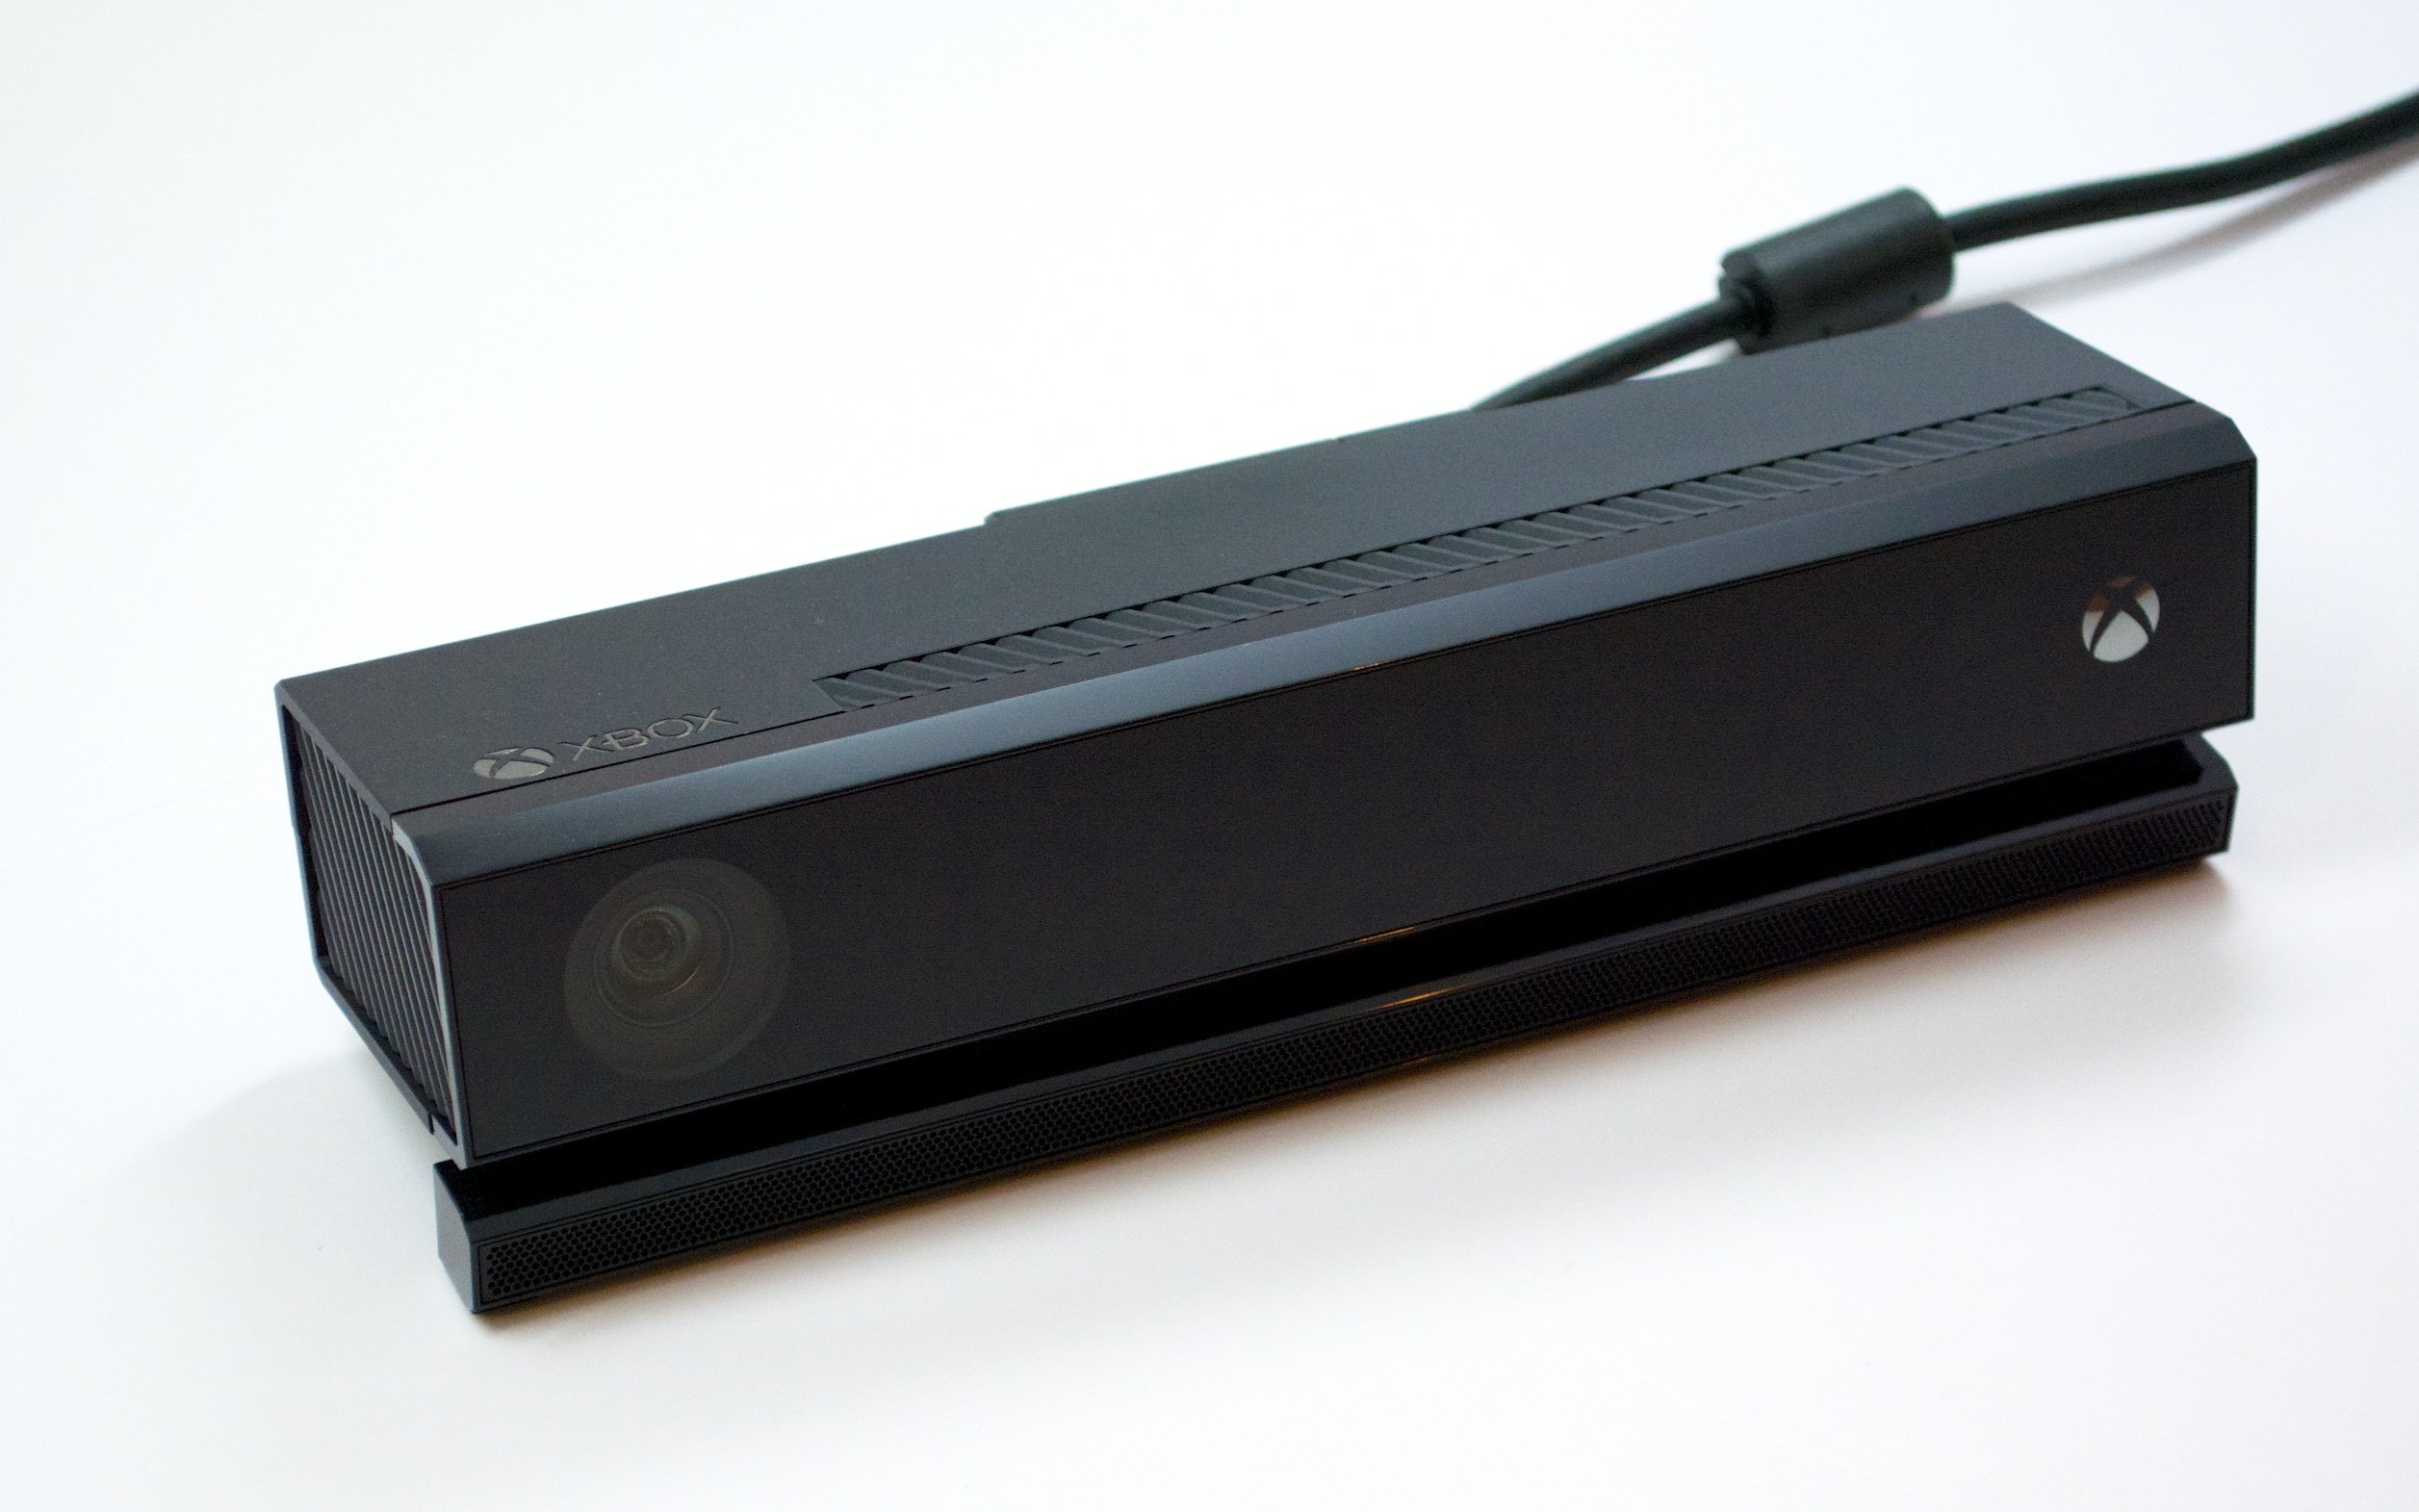 The Kinect 2 for Xbox One is more powerful than the previous Kinect and offers more use than the PS4 camera.